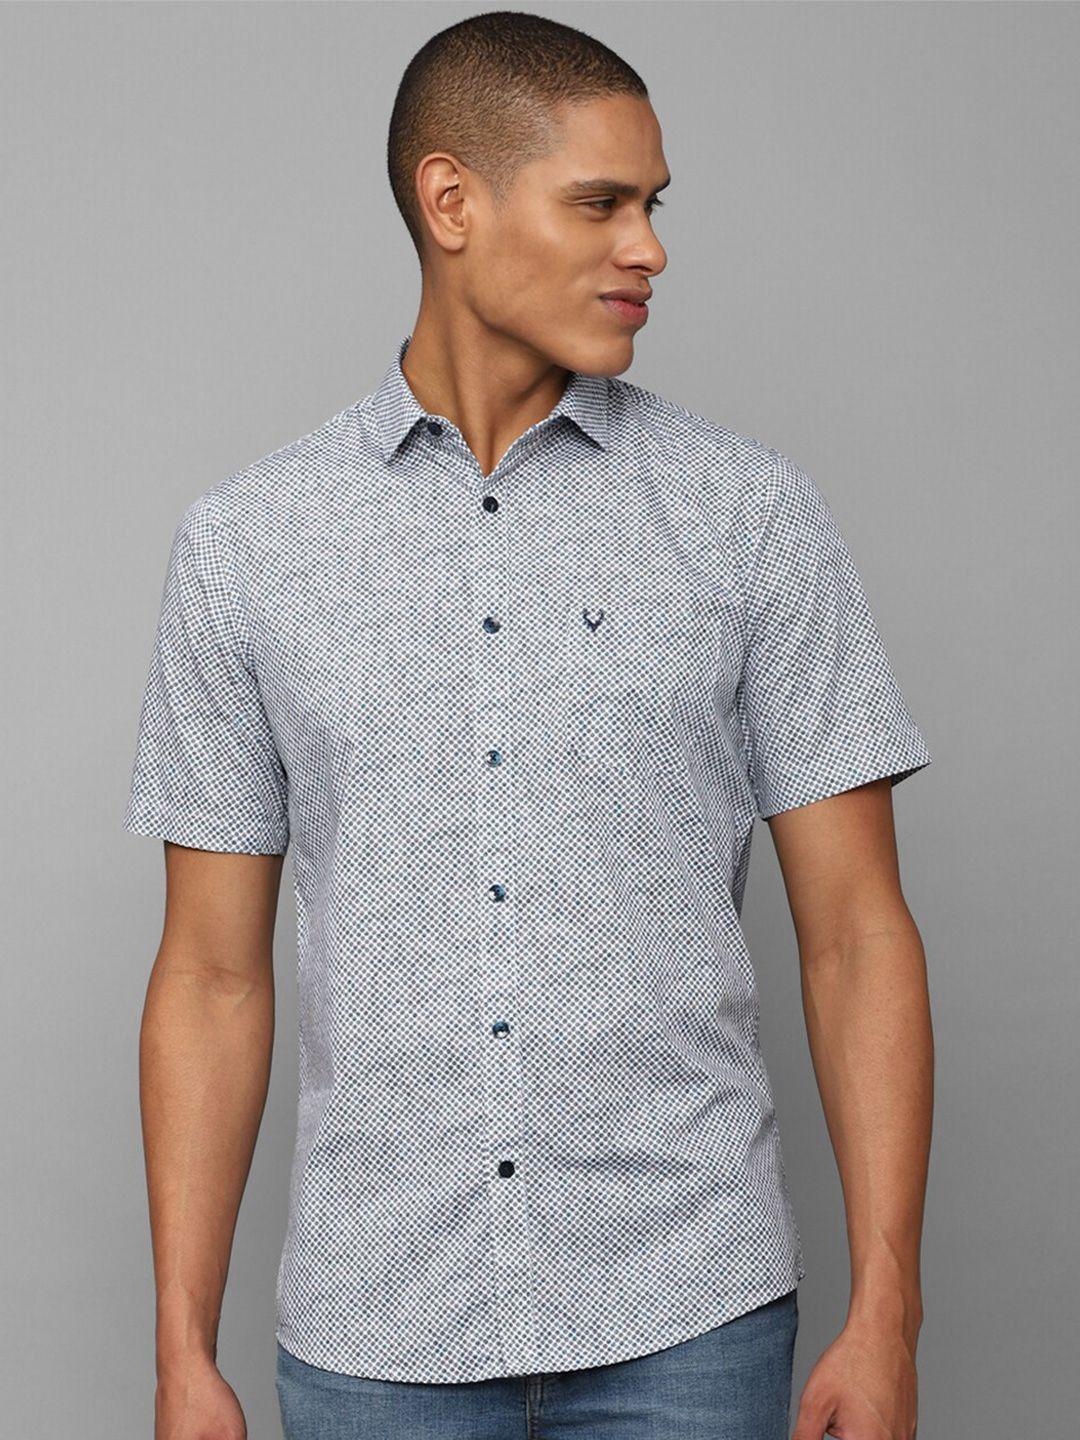 allen-solly-men-slim-fit-printed-pure-cotton-casual-shirt